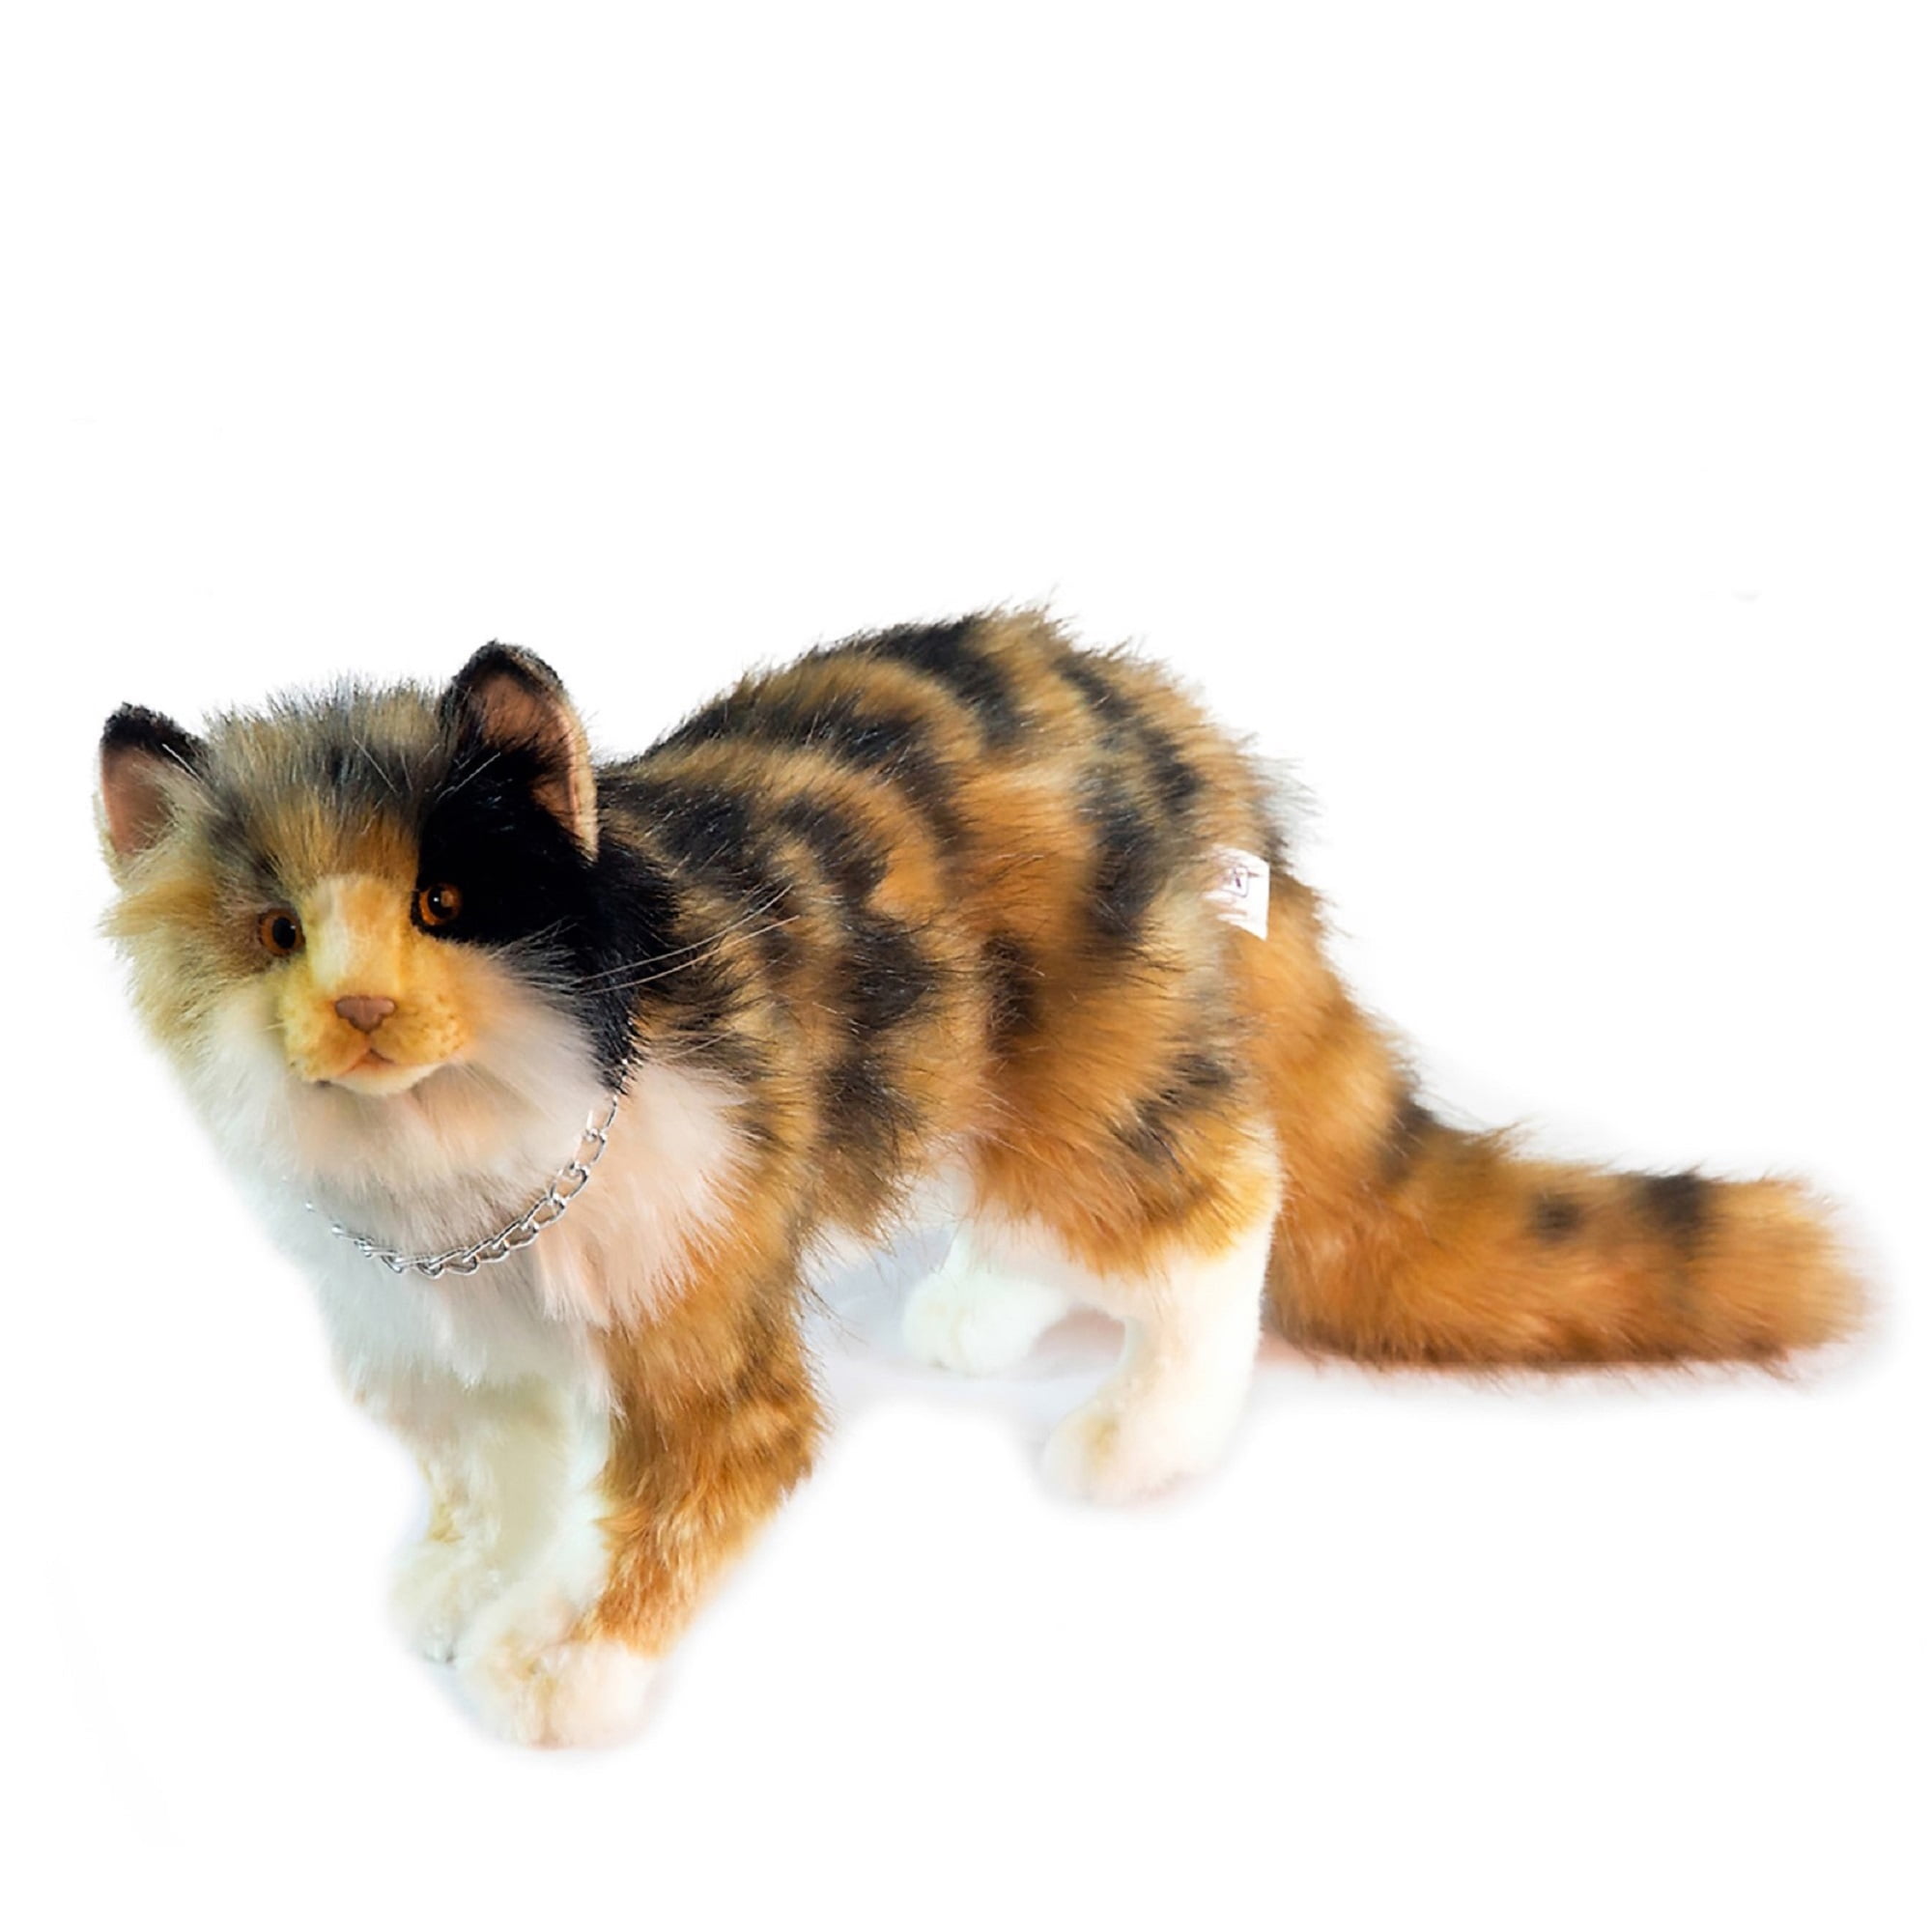 Hansa Sitting Calico Cat 7028 Plush Soft Toy Sold by Lincrafts Established 1993 